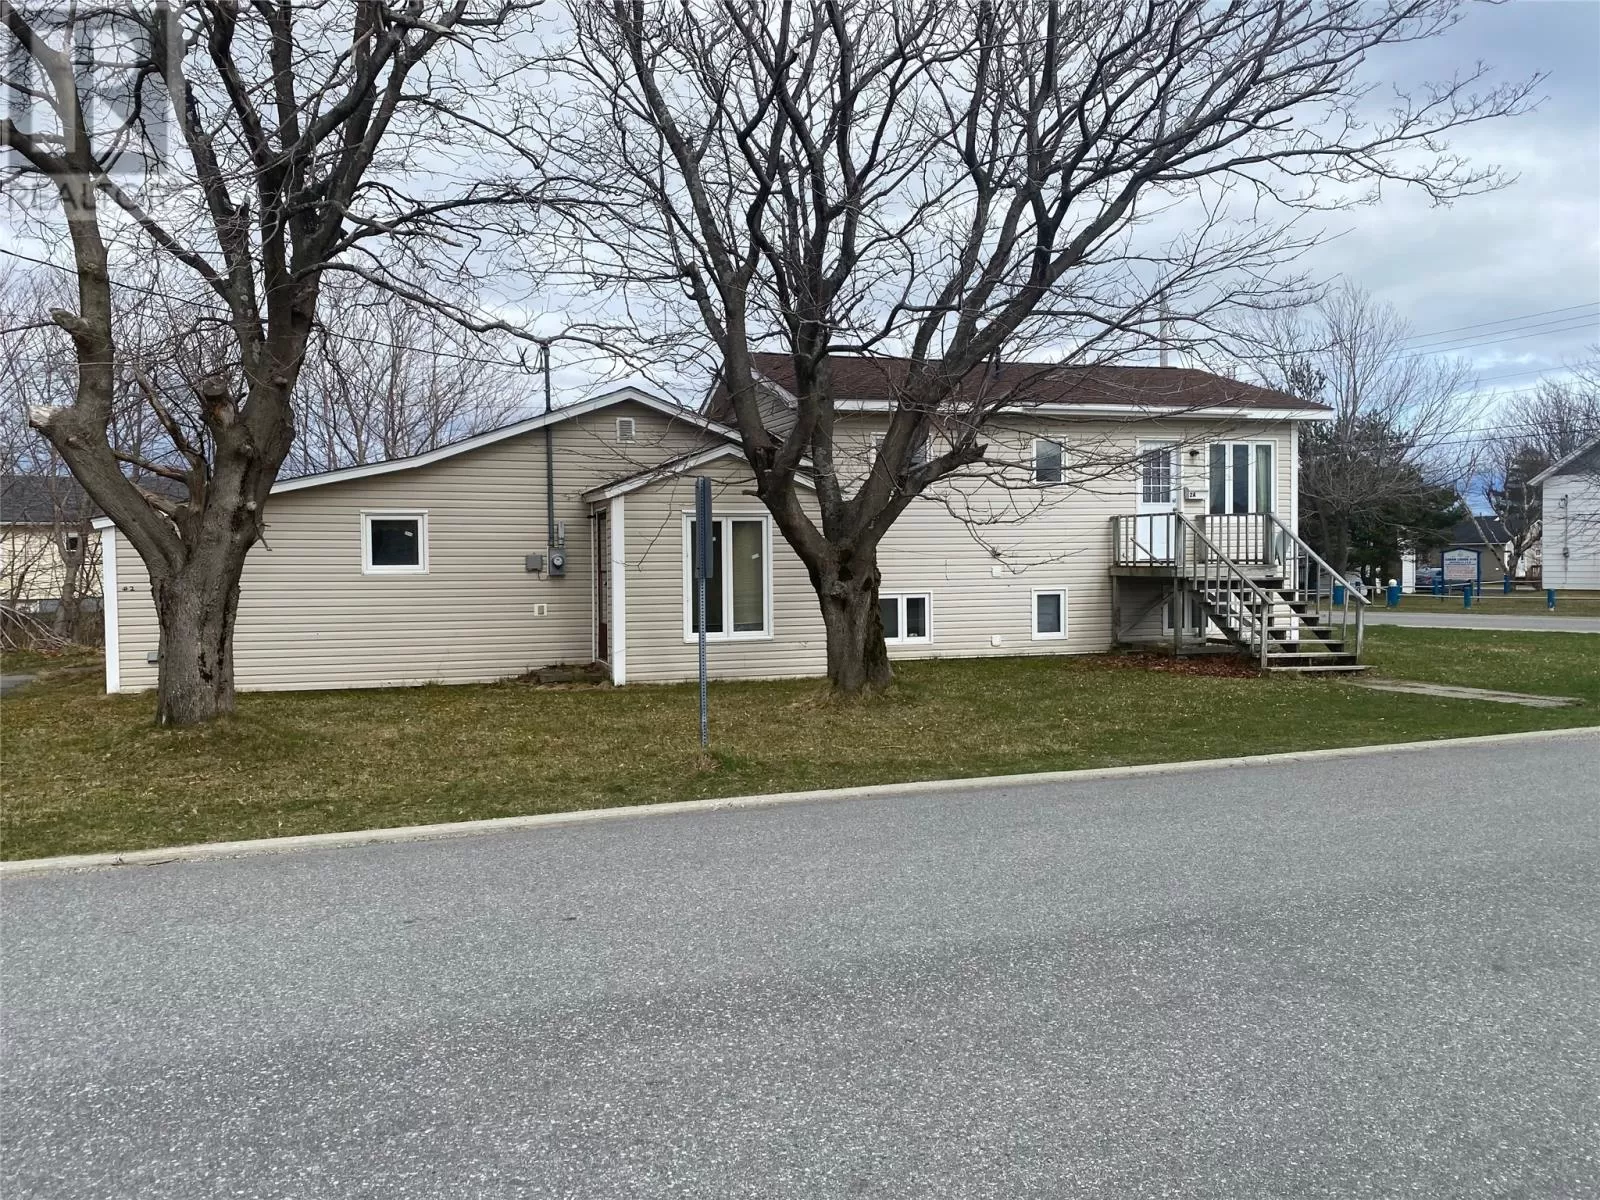 Multi-Family for rent: 2 Hillview Avenue, Stephenville, Newfoundland & Labrador A2N 1S3